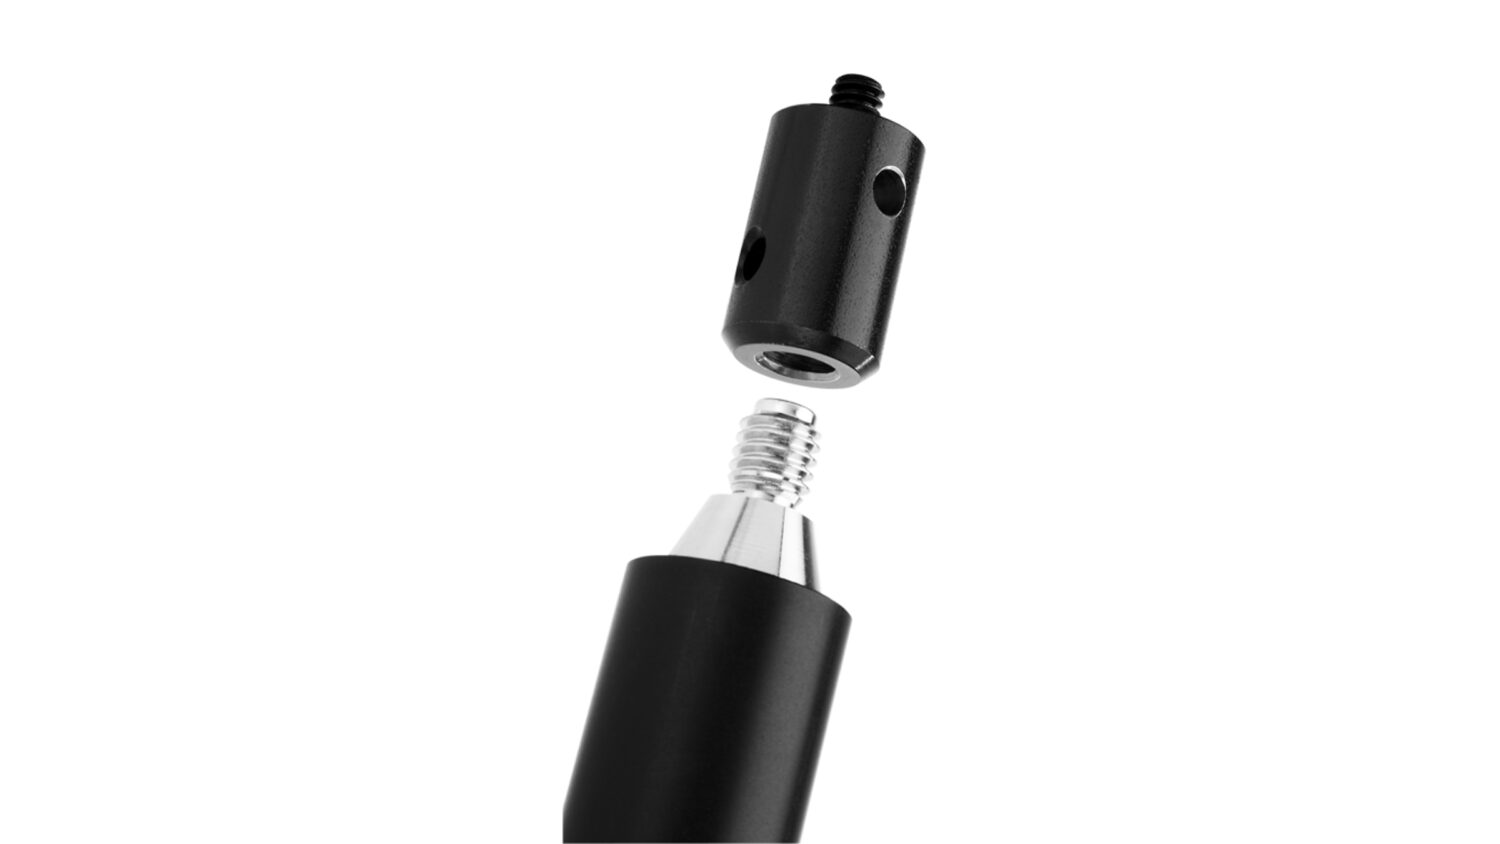 FOBA interchangeable adapter for lamps, ball heads and cameras with combitube